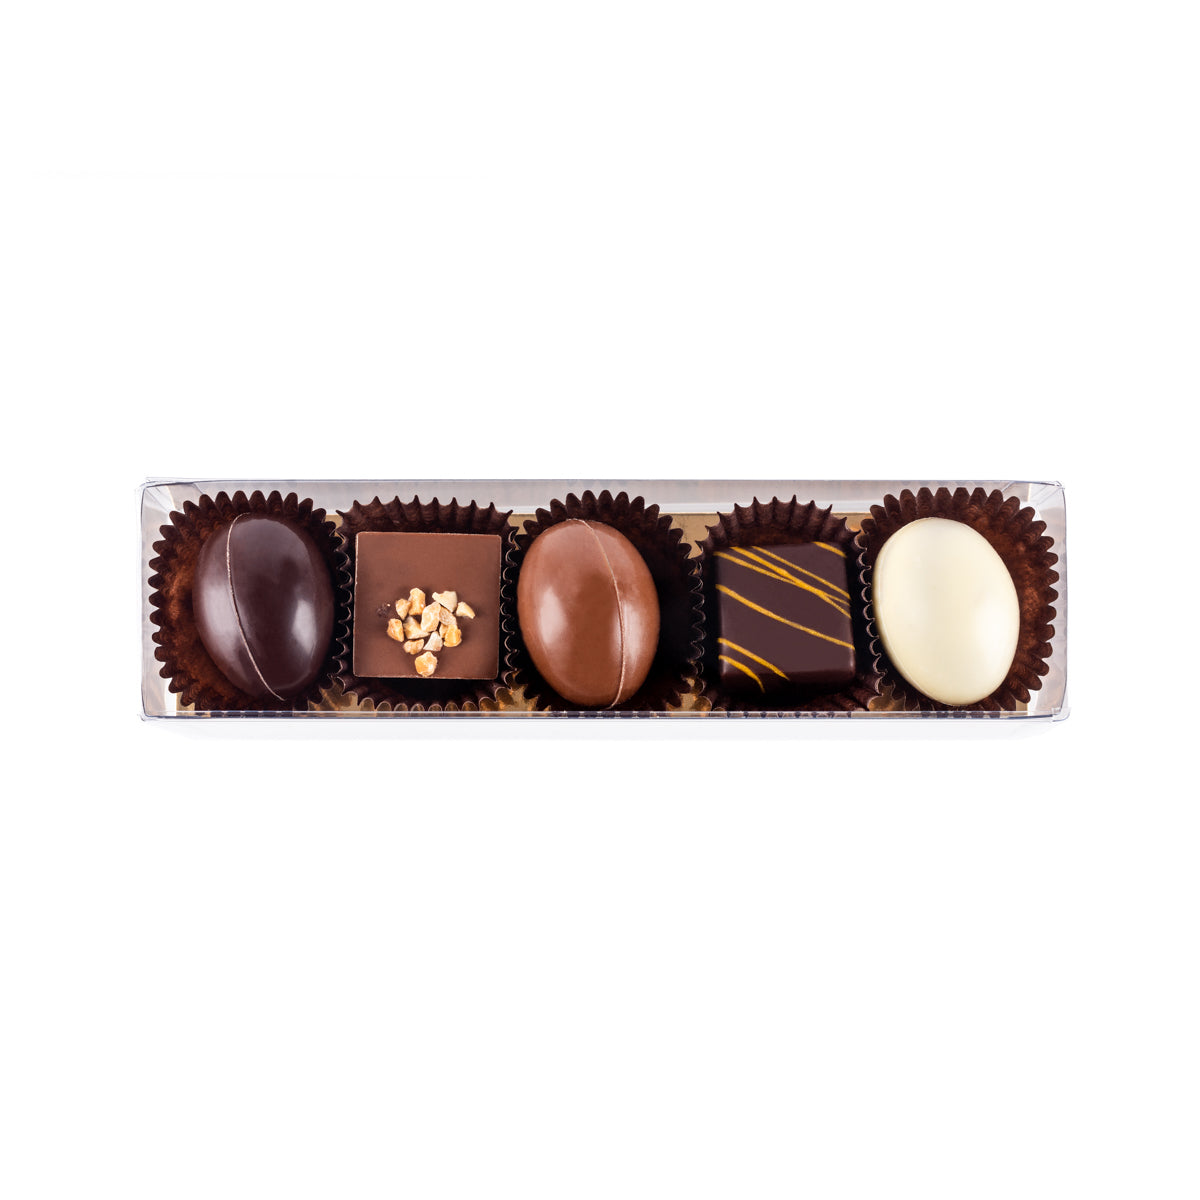 Box of 5 assorted chocolates - Easter